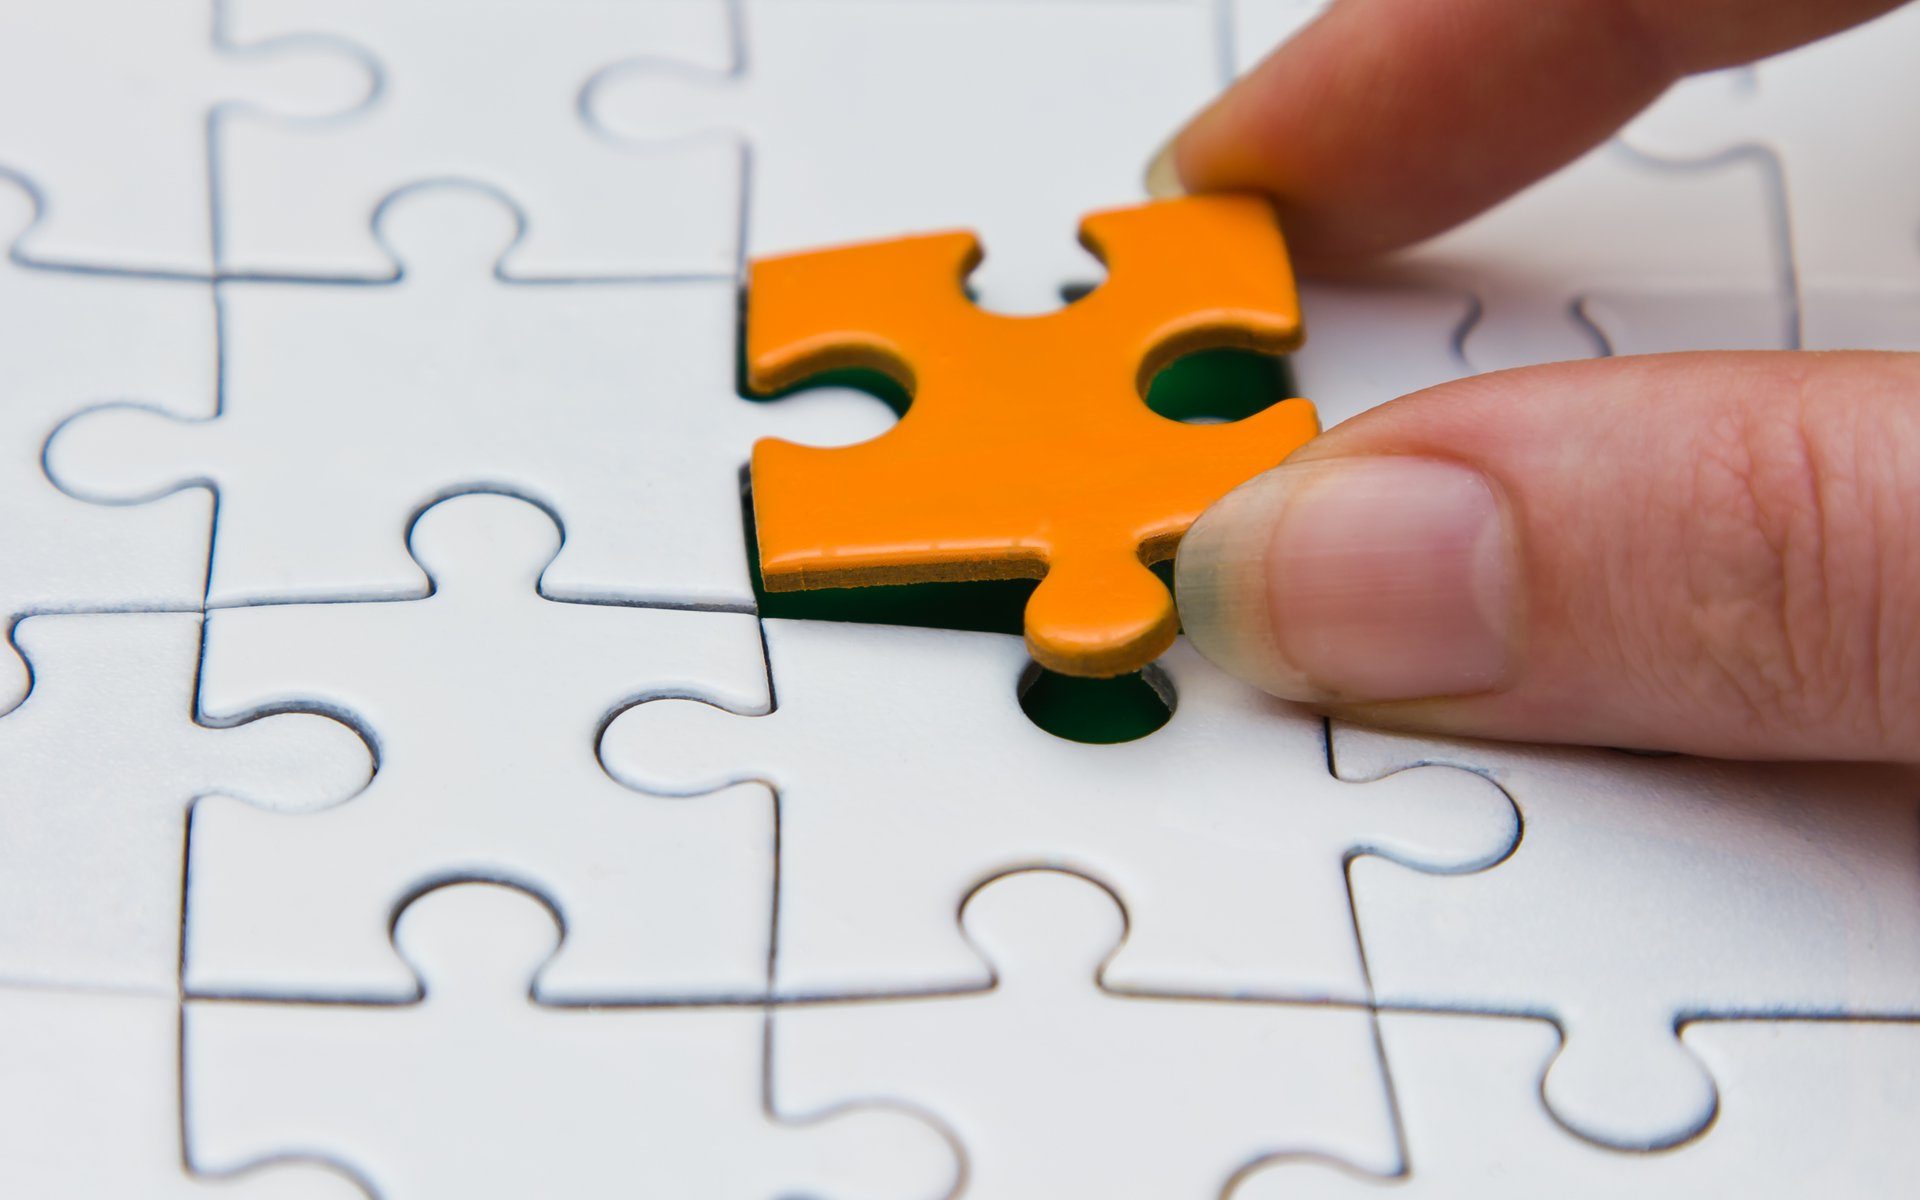 Digital Assets ‘Missing Piece Of Puzzle’ For Investors, New Research Finds